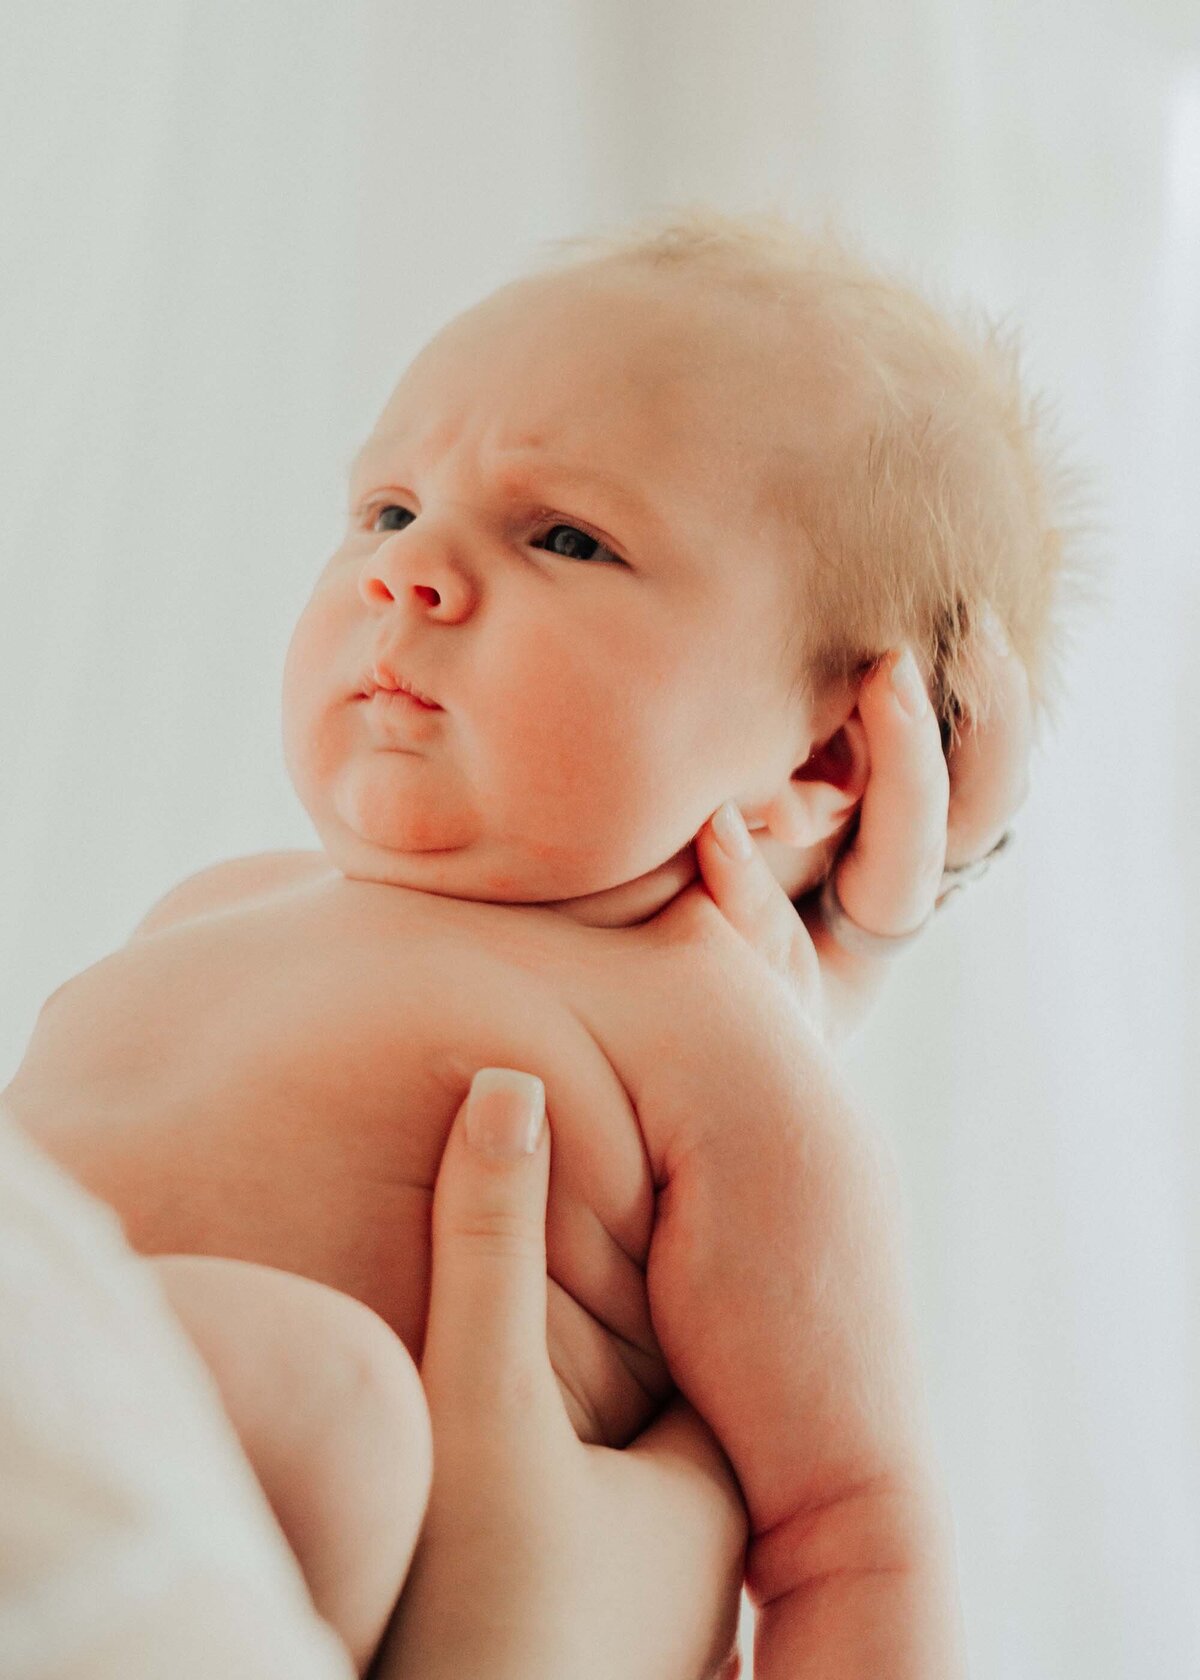 Maddie Rae Photography naked baby with a grumpy face looking at mom